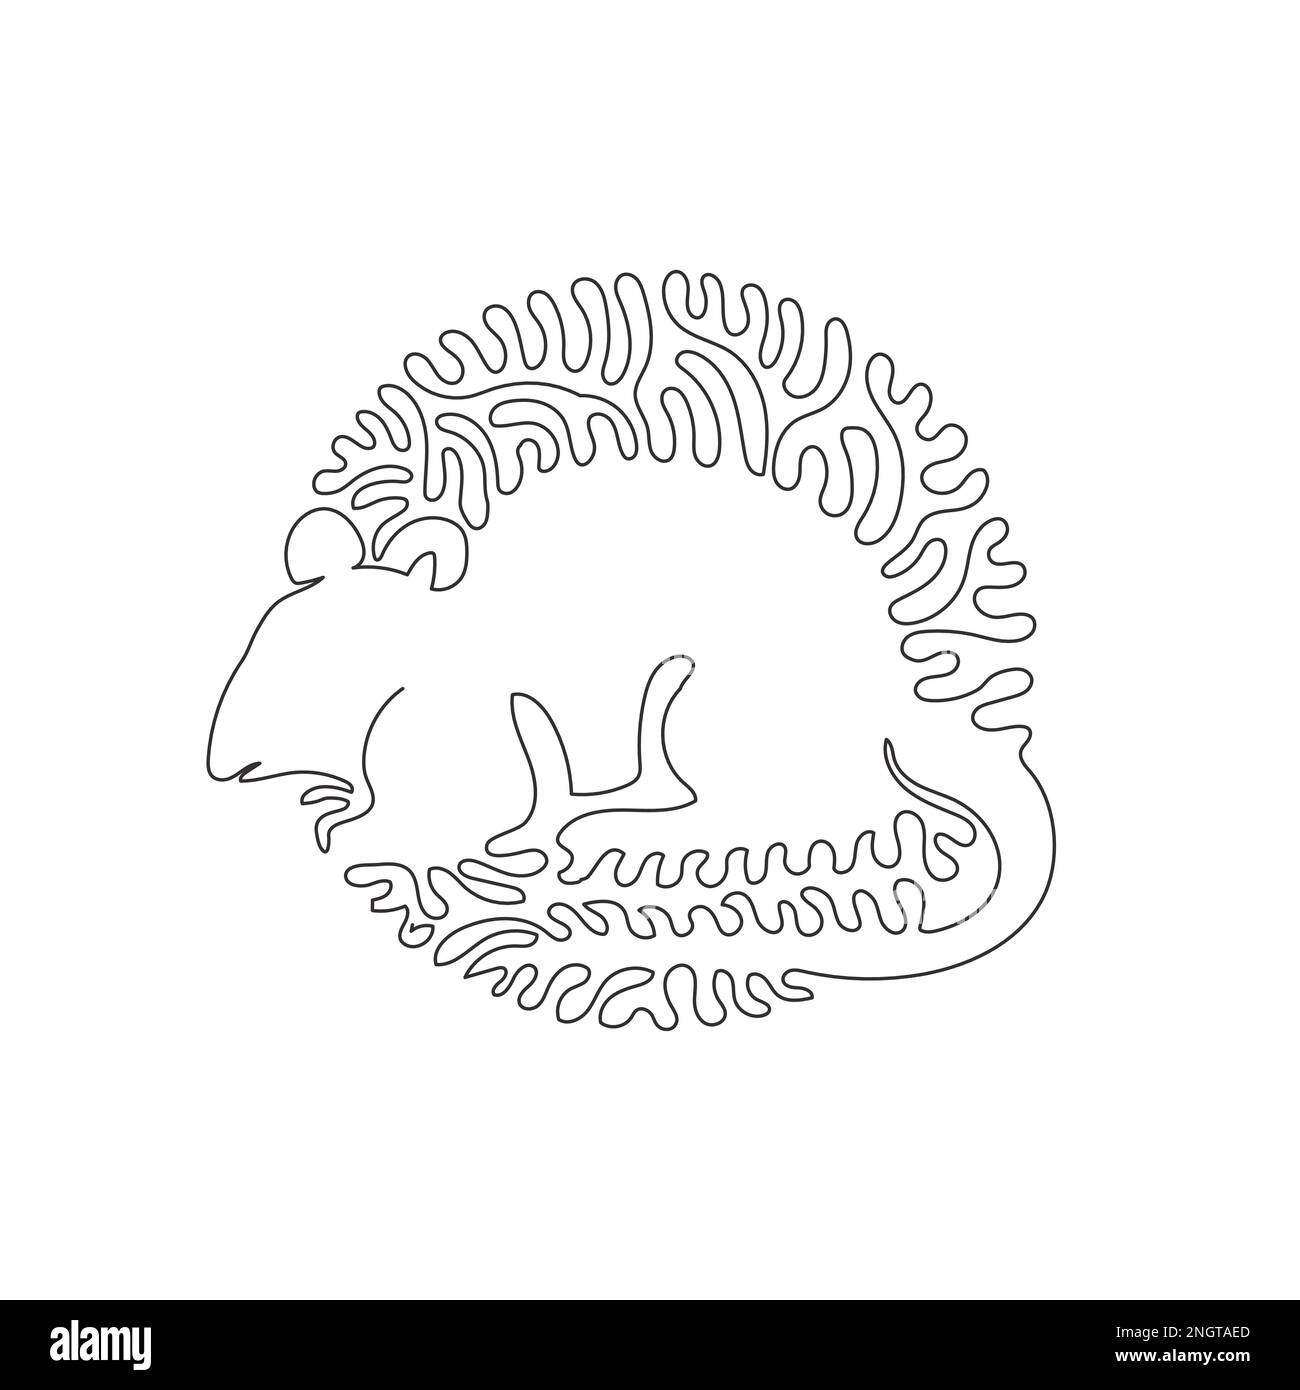 Continuous one line drawing of frisky mouse abstract art. Single line editable stroke vector illustrations of little rodents are quite unique Stock Vector